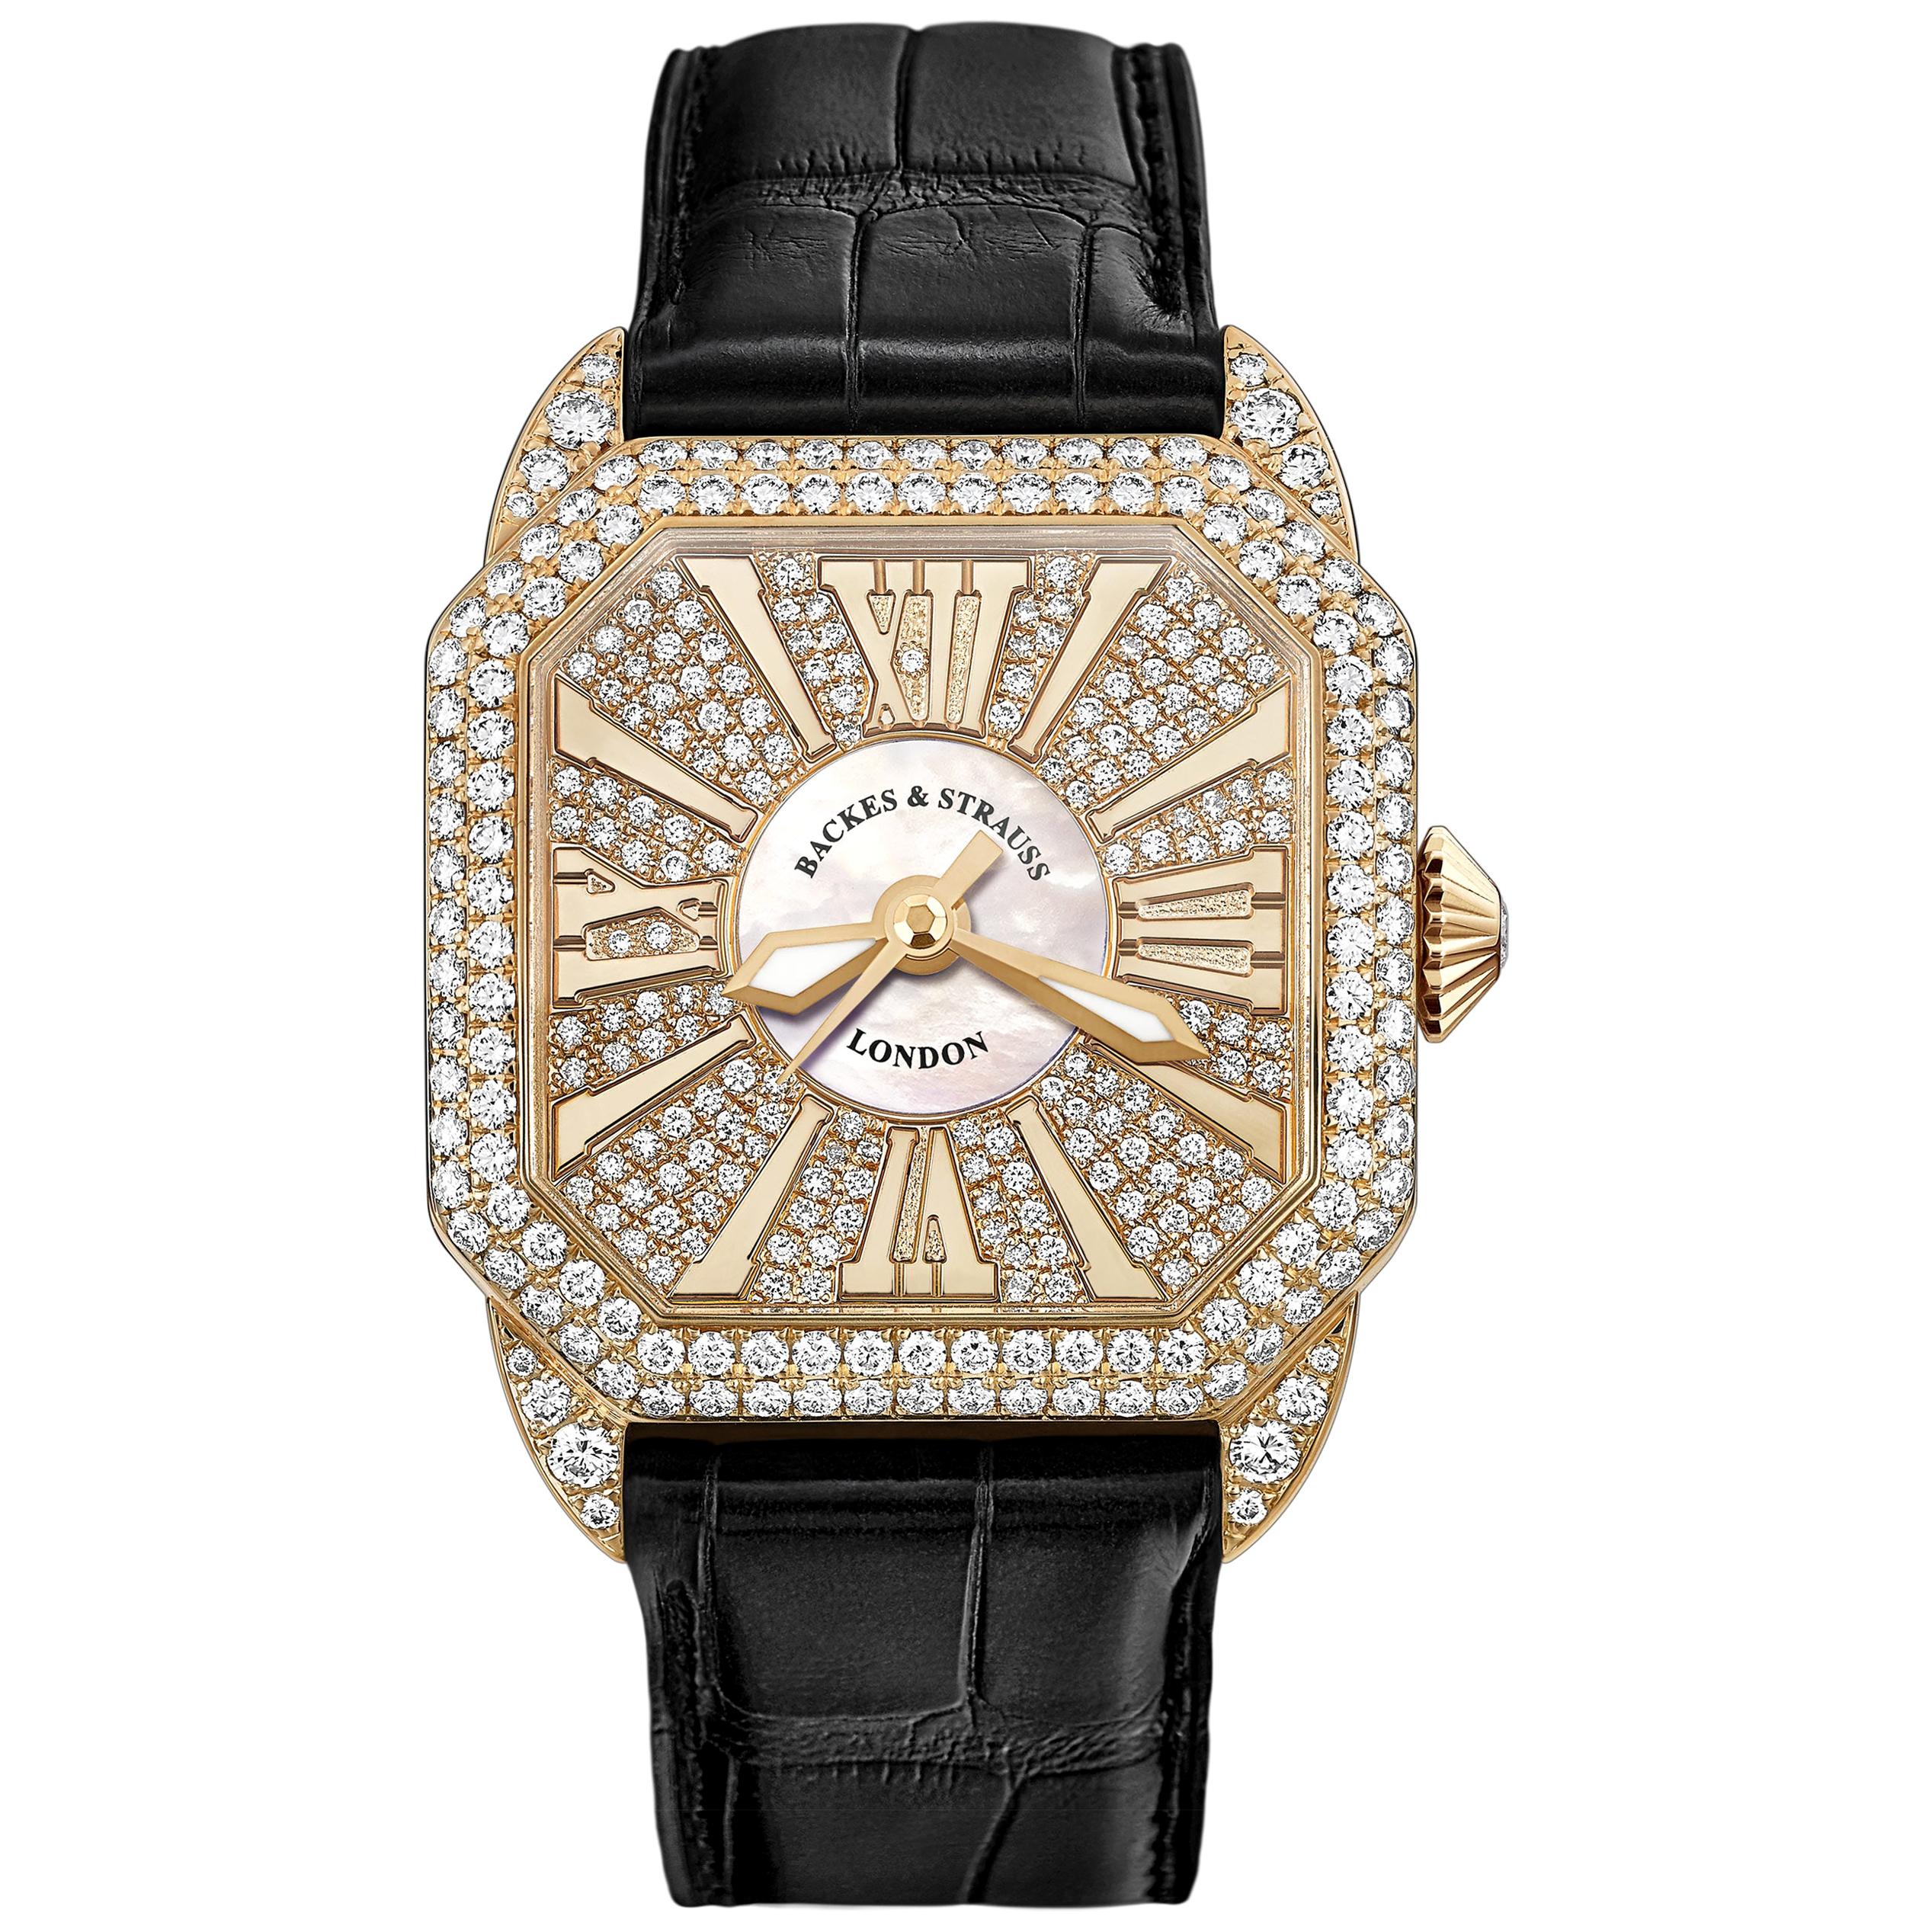 Berkeley 37 Luxury Diamond Watch for Women, Rose Gold, Backes and Strauss For Sale